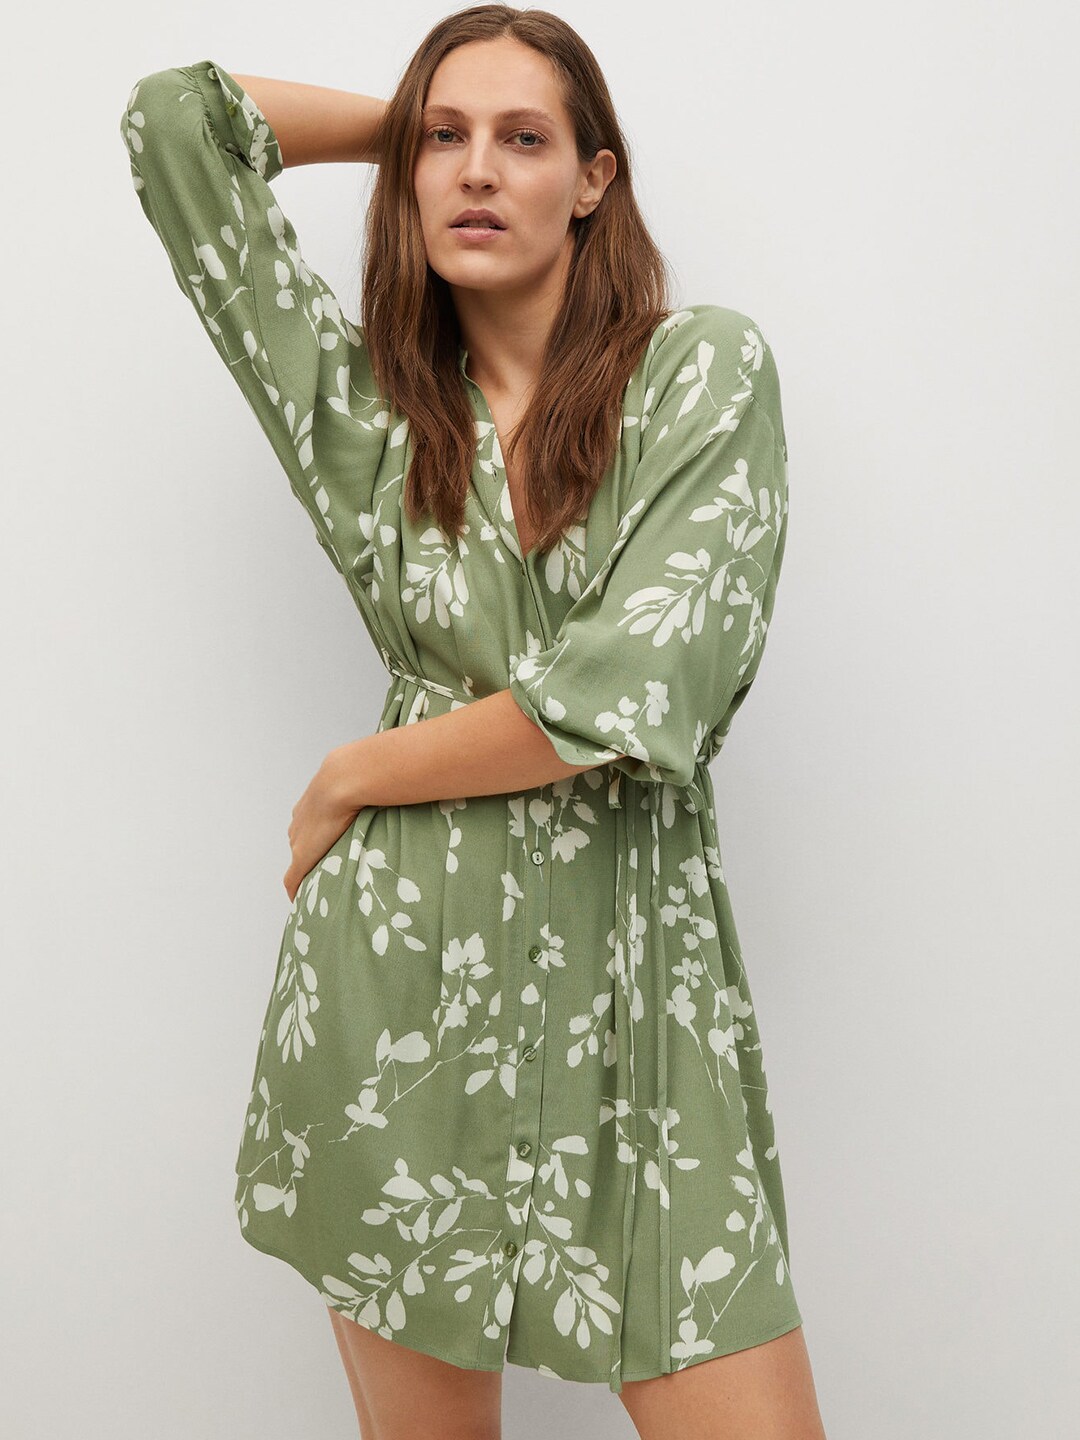 MANGO Women Green & Off-White Sustainable Rayon Floral A-Line Dress